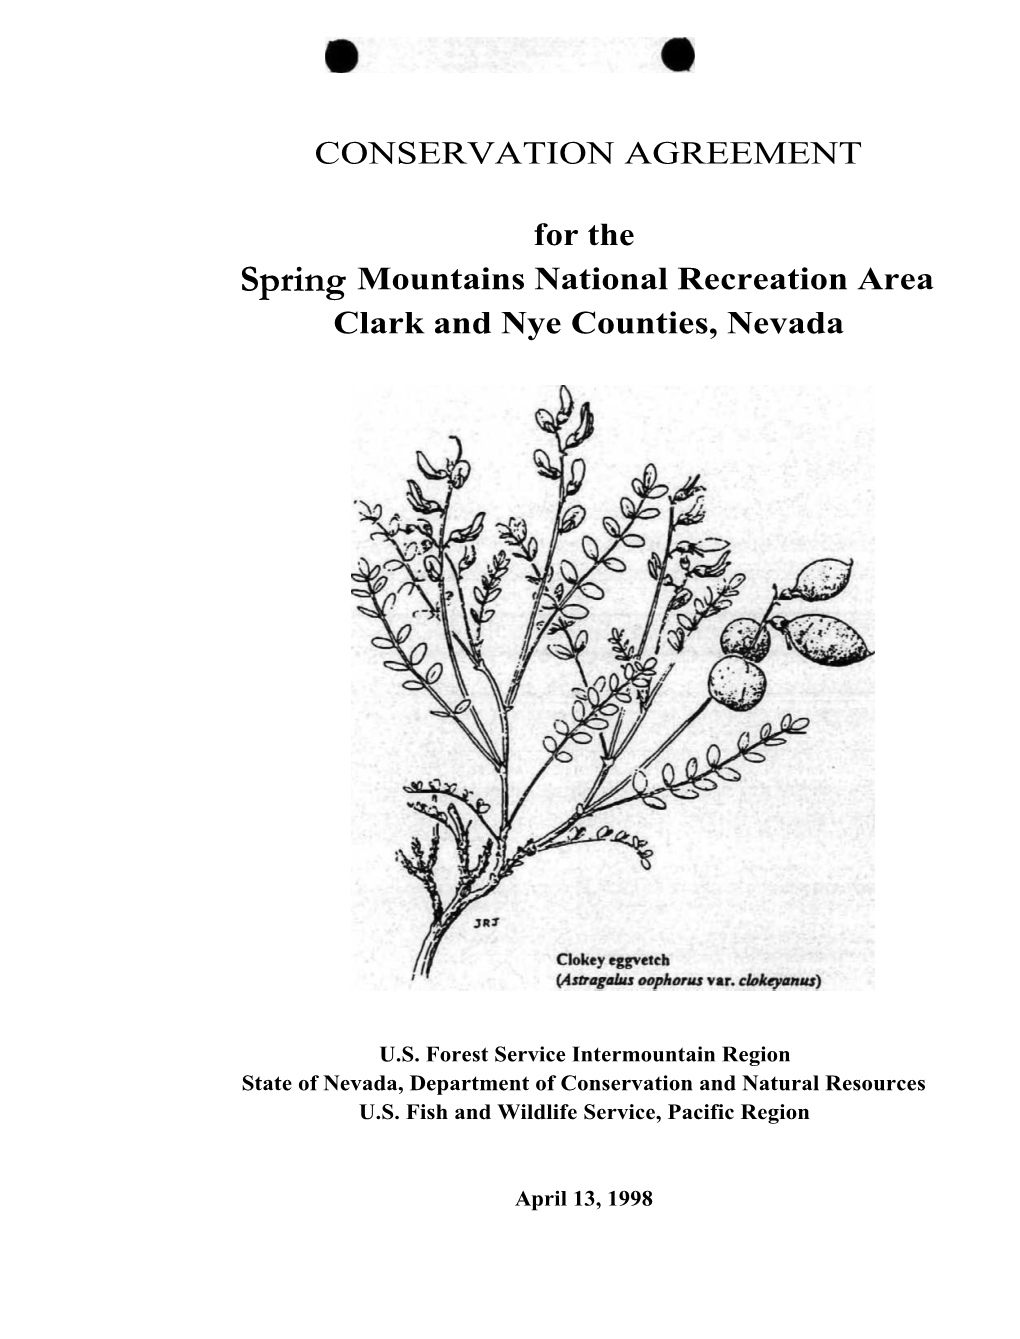 Conservation Agreement for the Spring Mountains National Recreation Area Clark and Nye Counties, Nevada